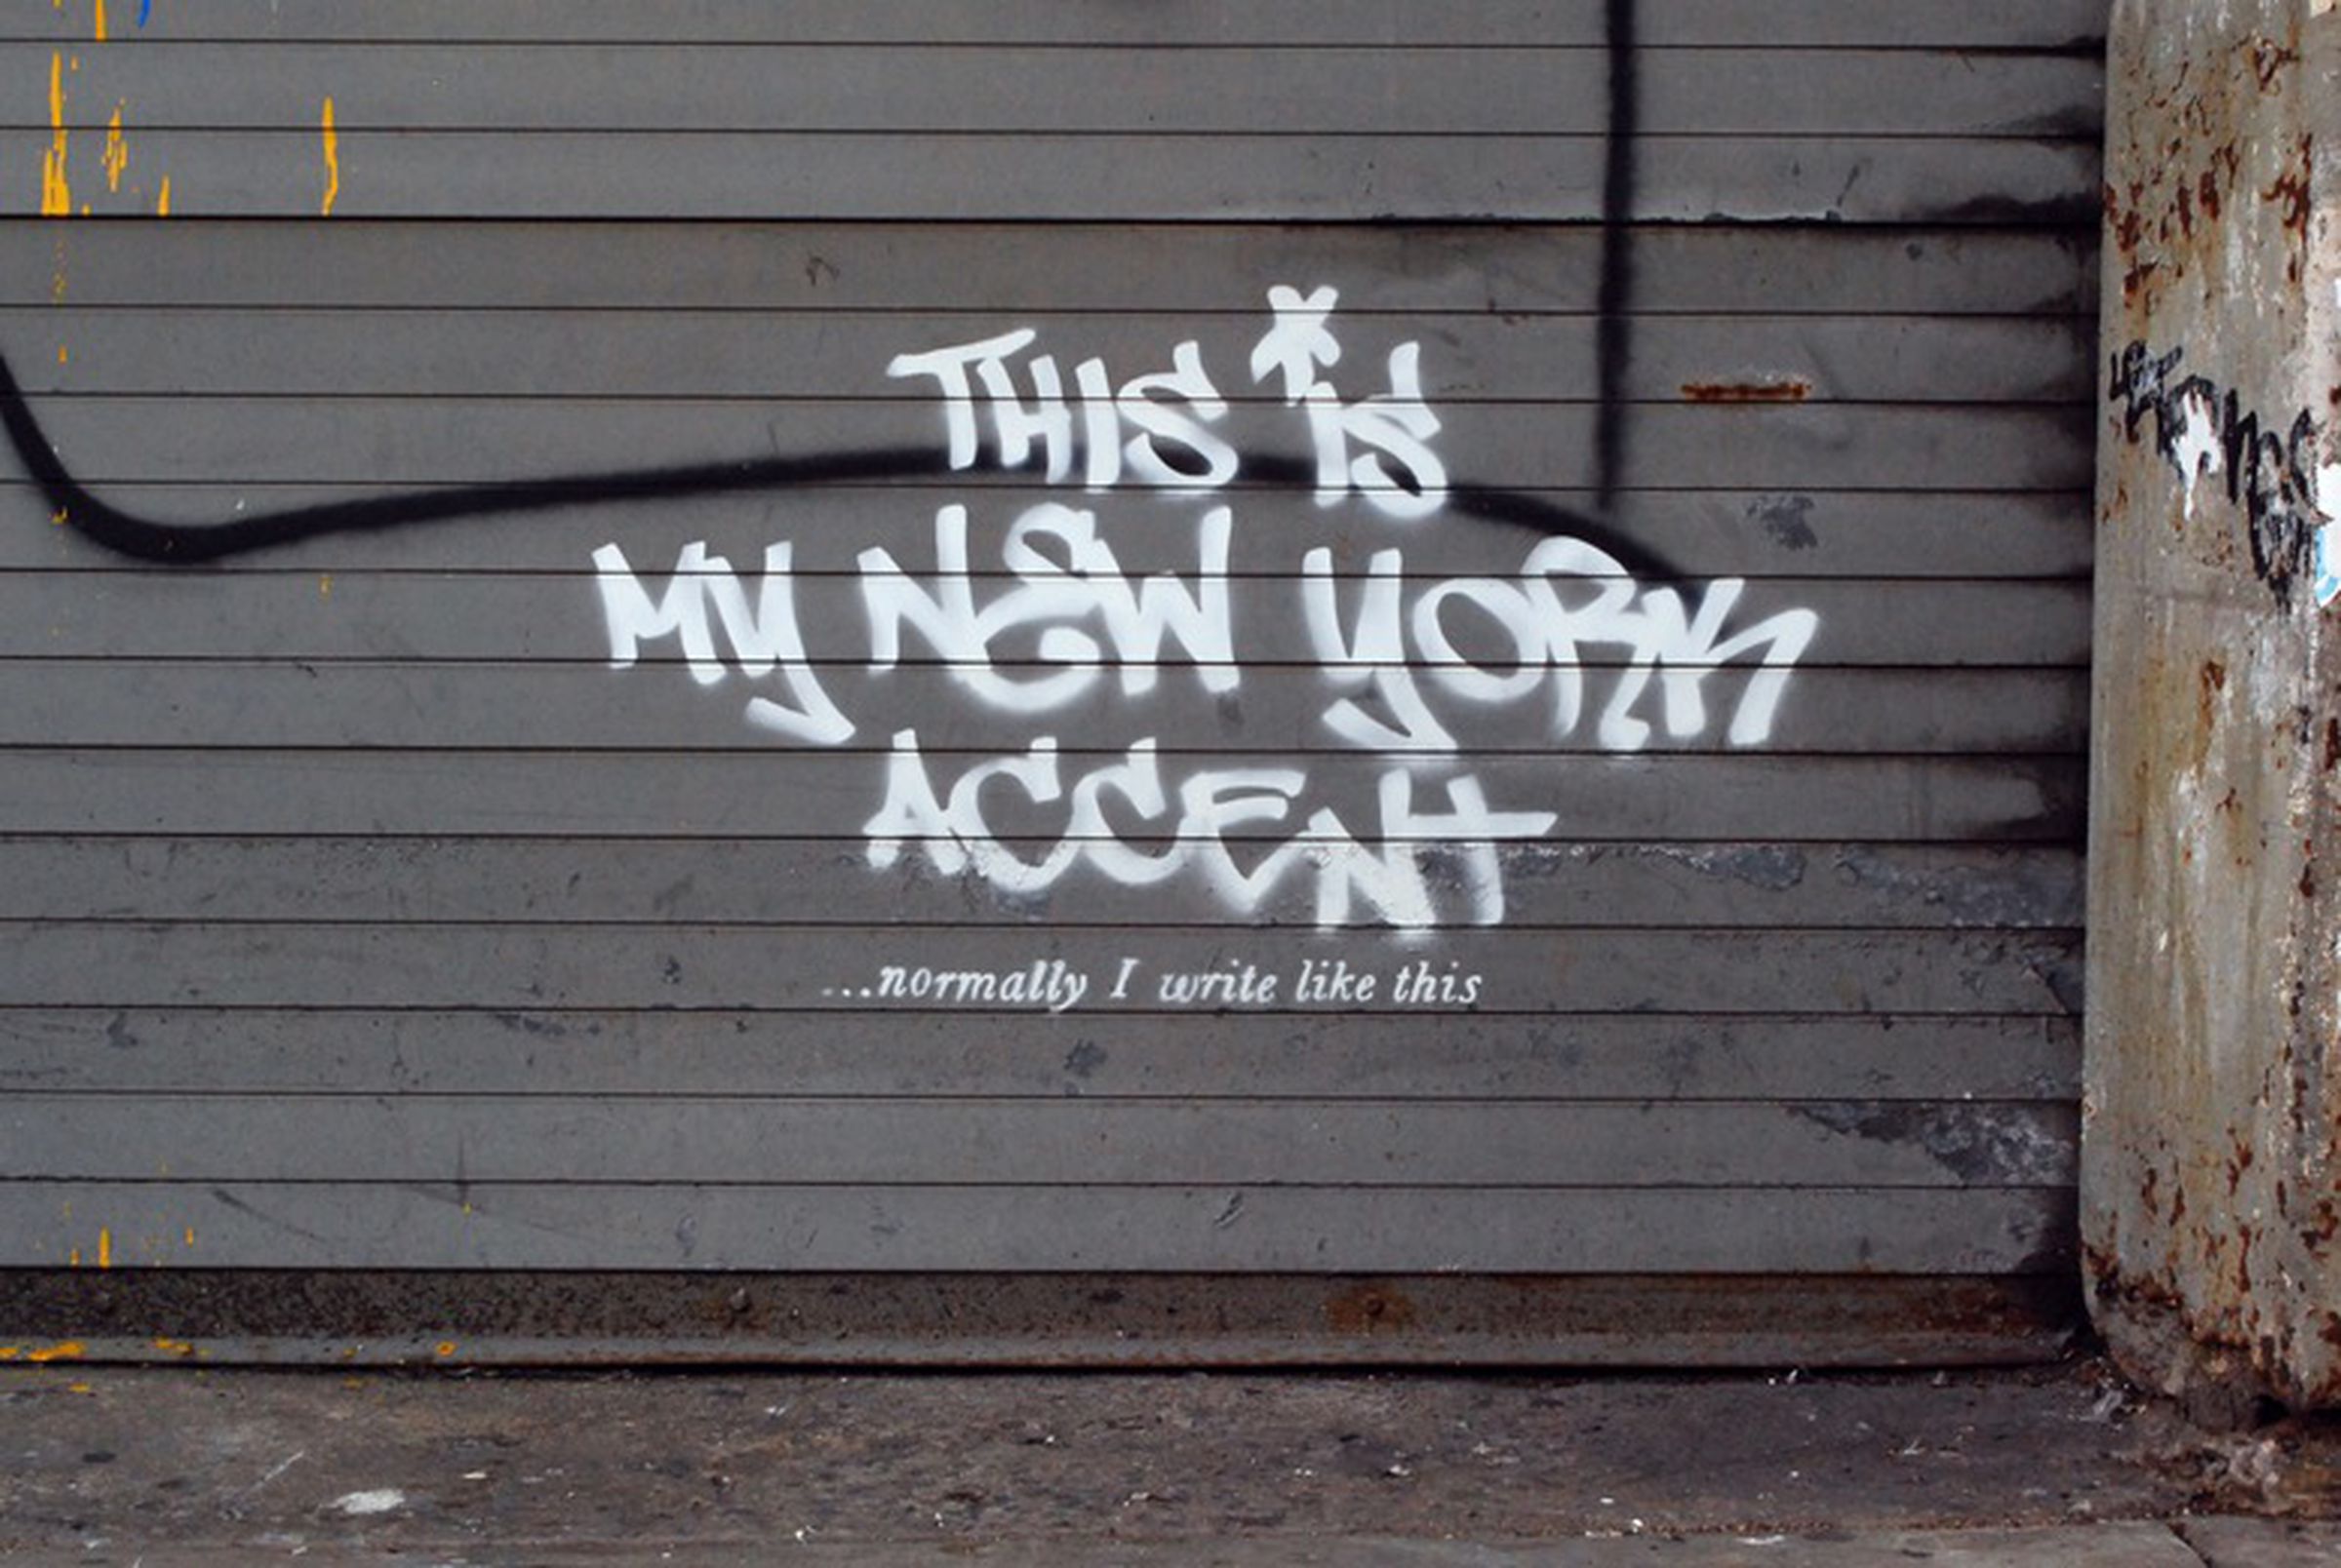 Banksy's New York City street art residency, 'Better Out Than In'